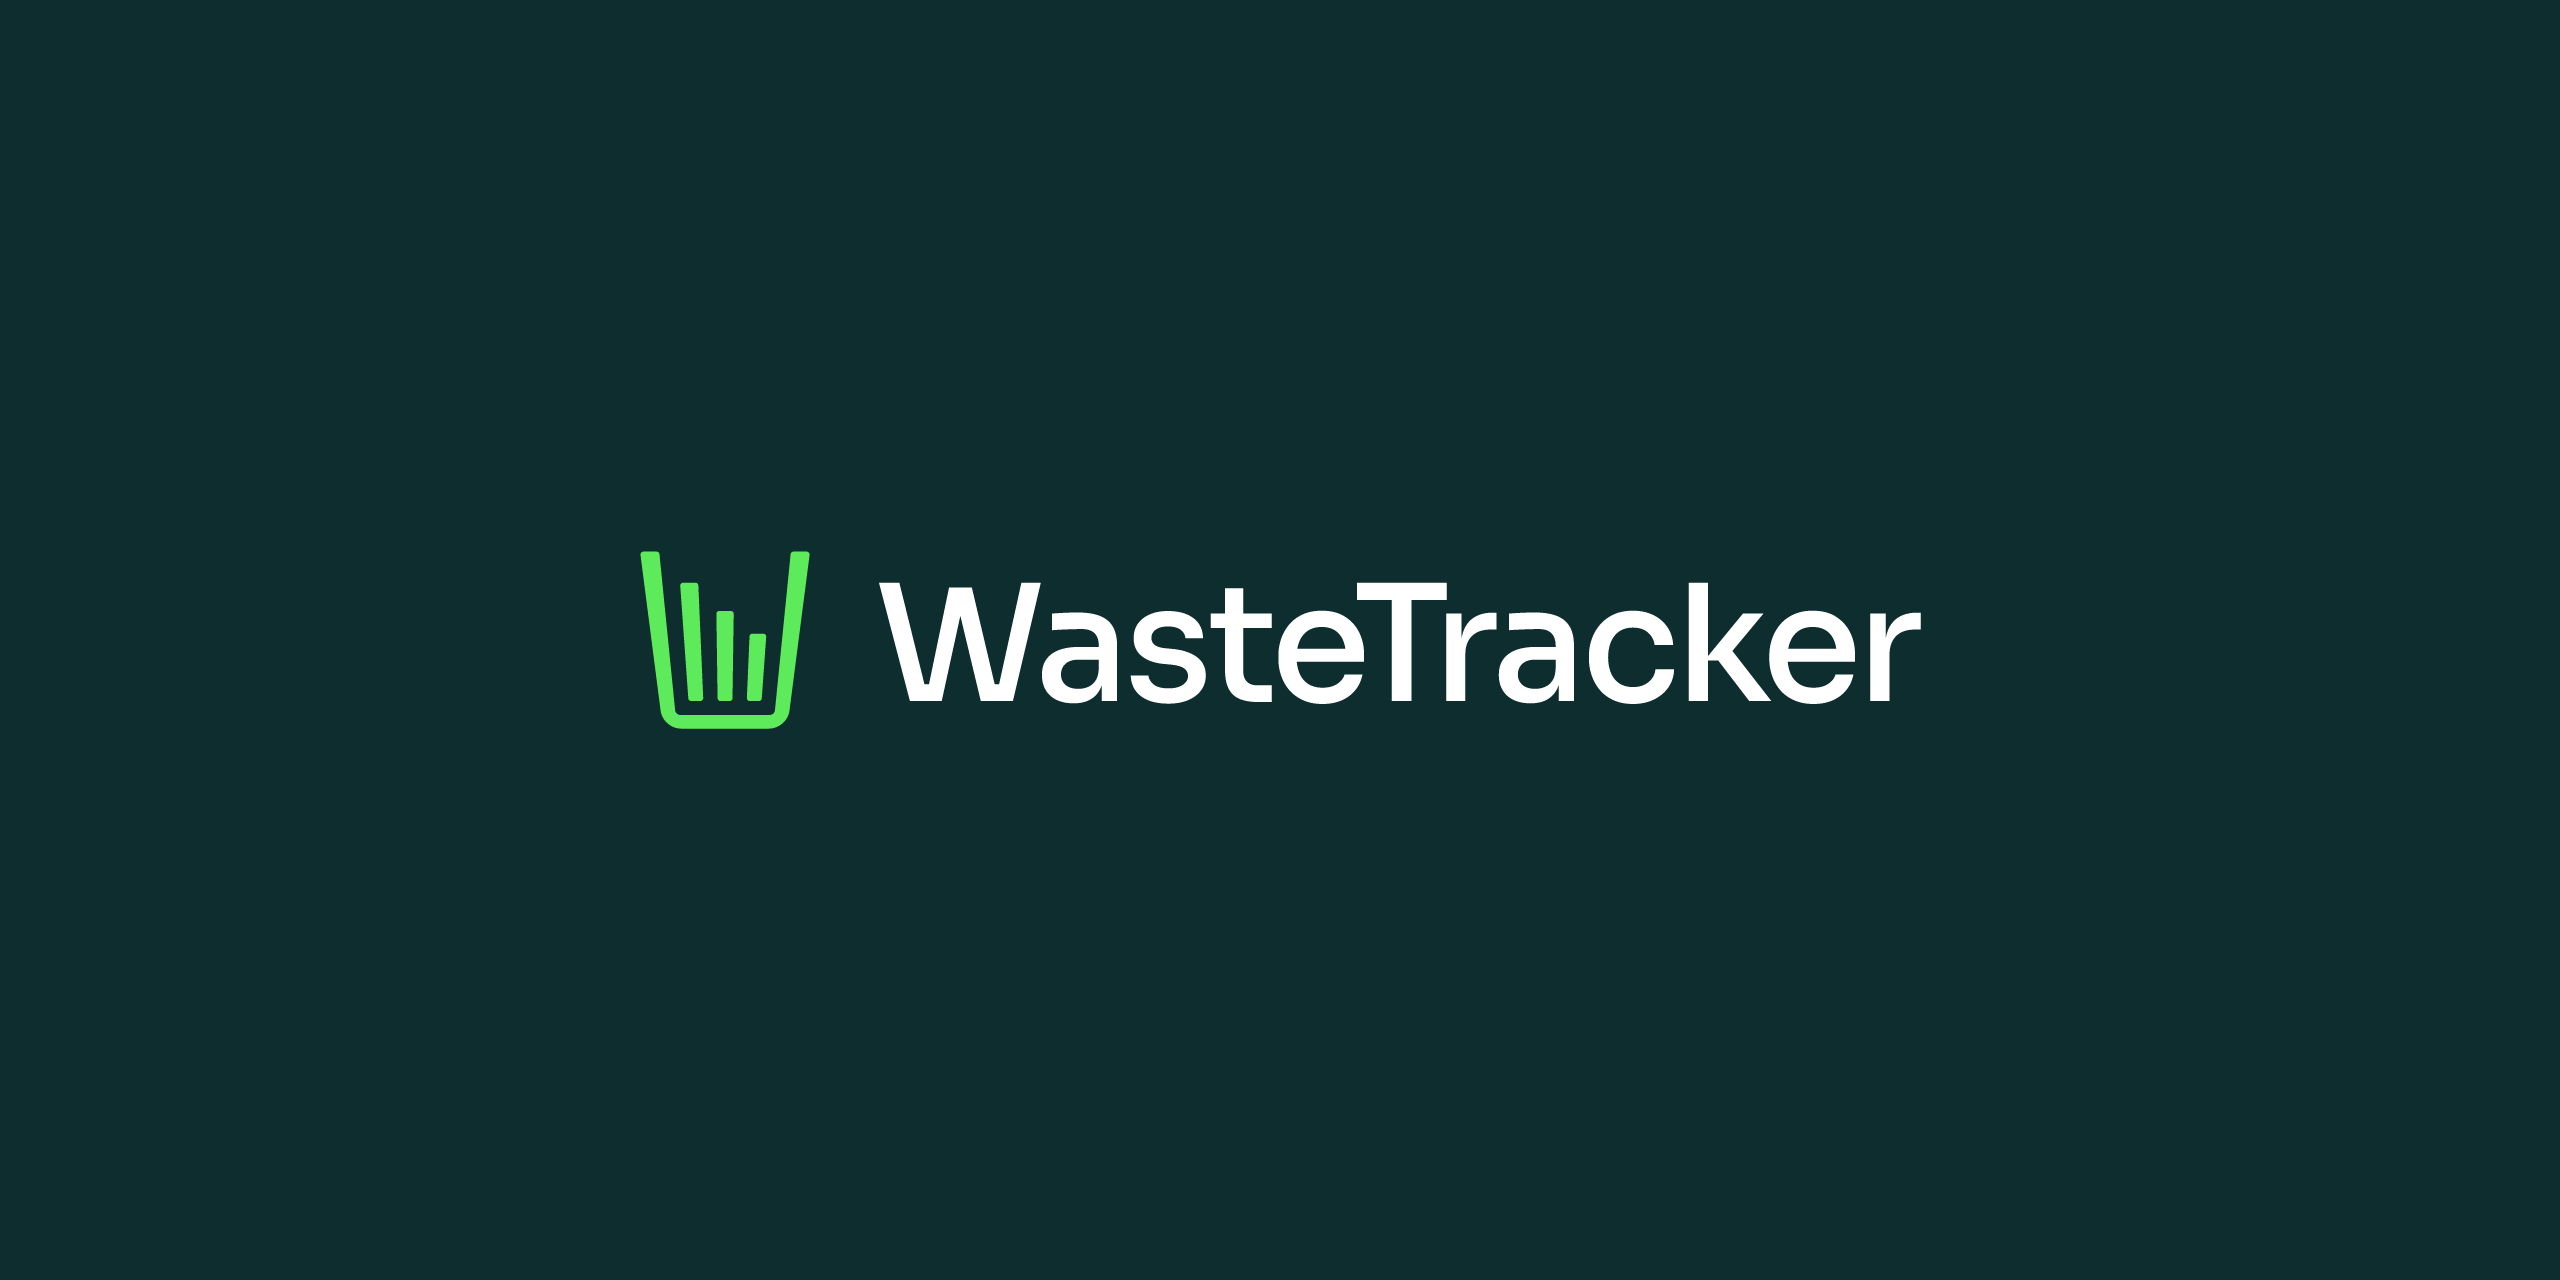 WasteTracker logo on a dark background, highlighting its professional and bold design.